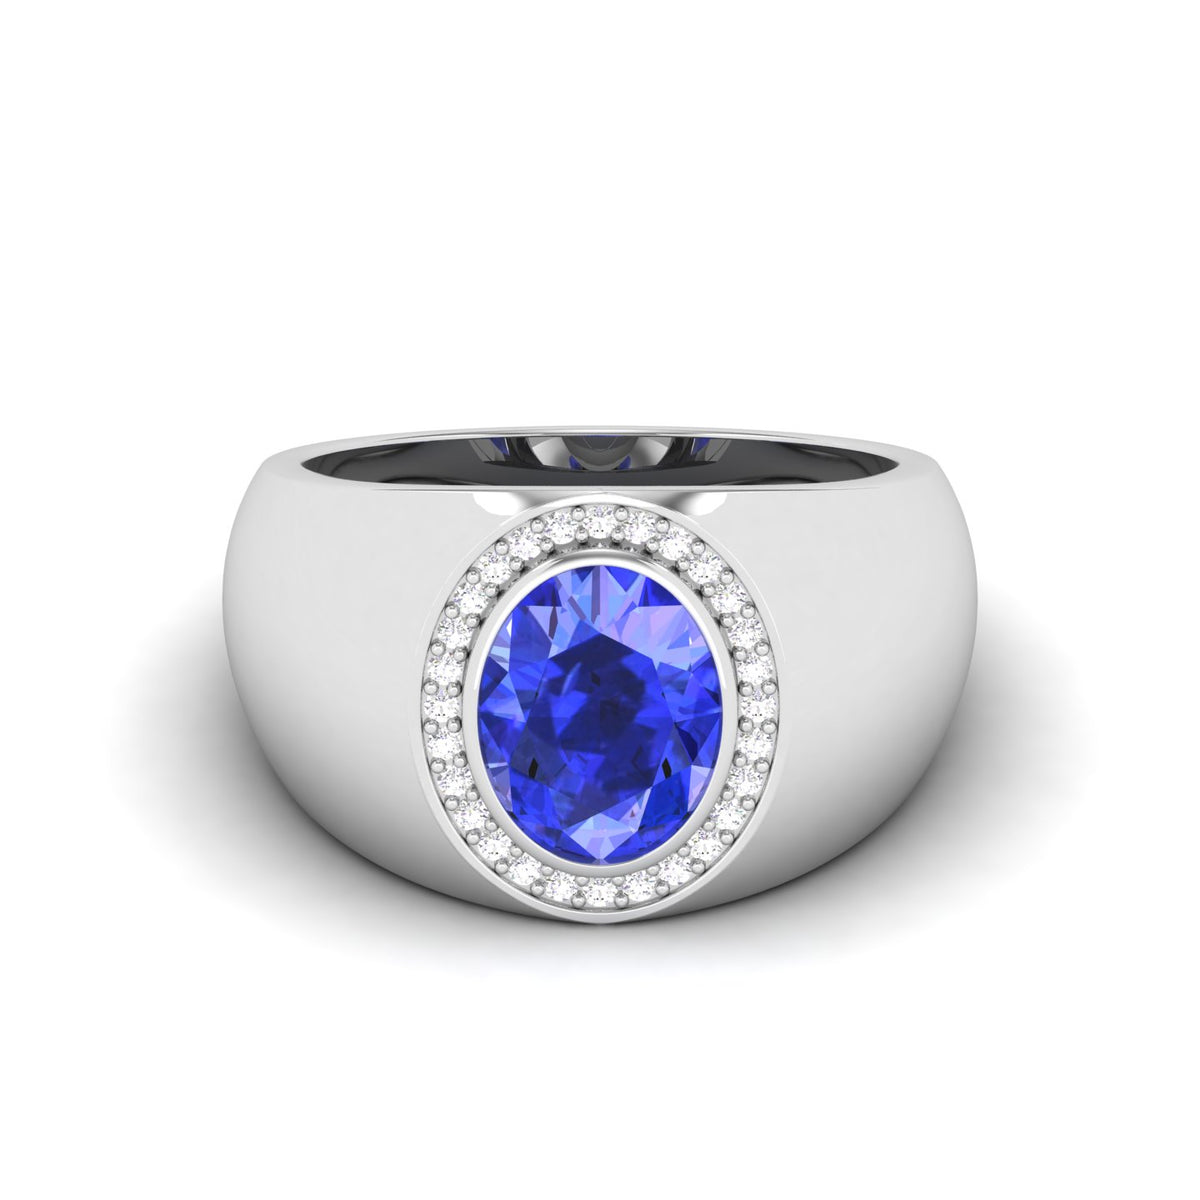 Maurya Solitaire Oval Tanzanite Signet Engagement Bold Ring with Diamond Halo